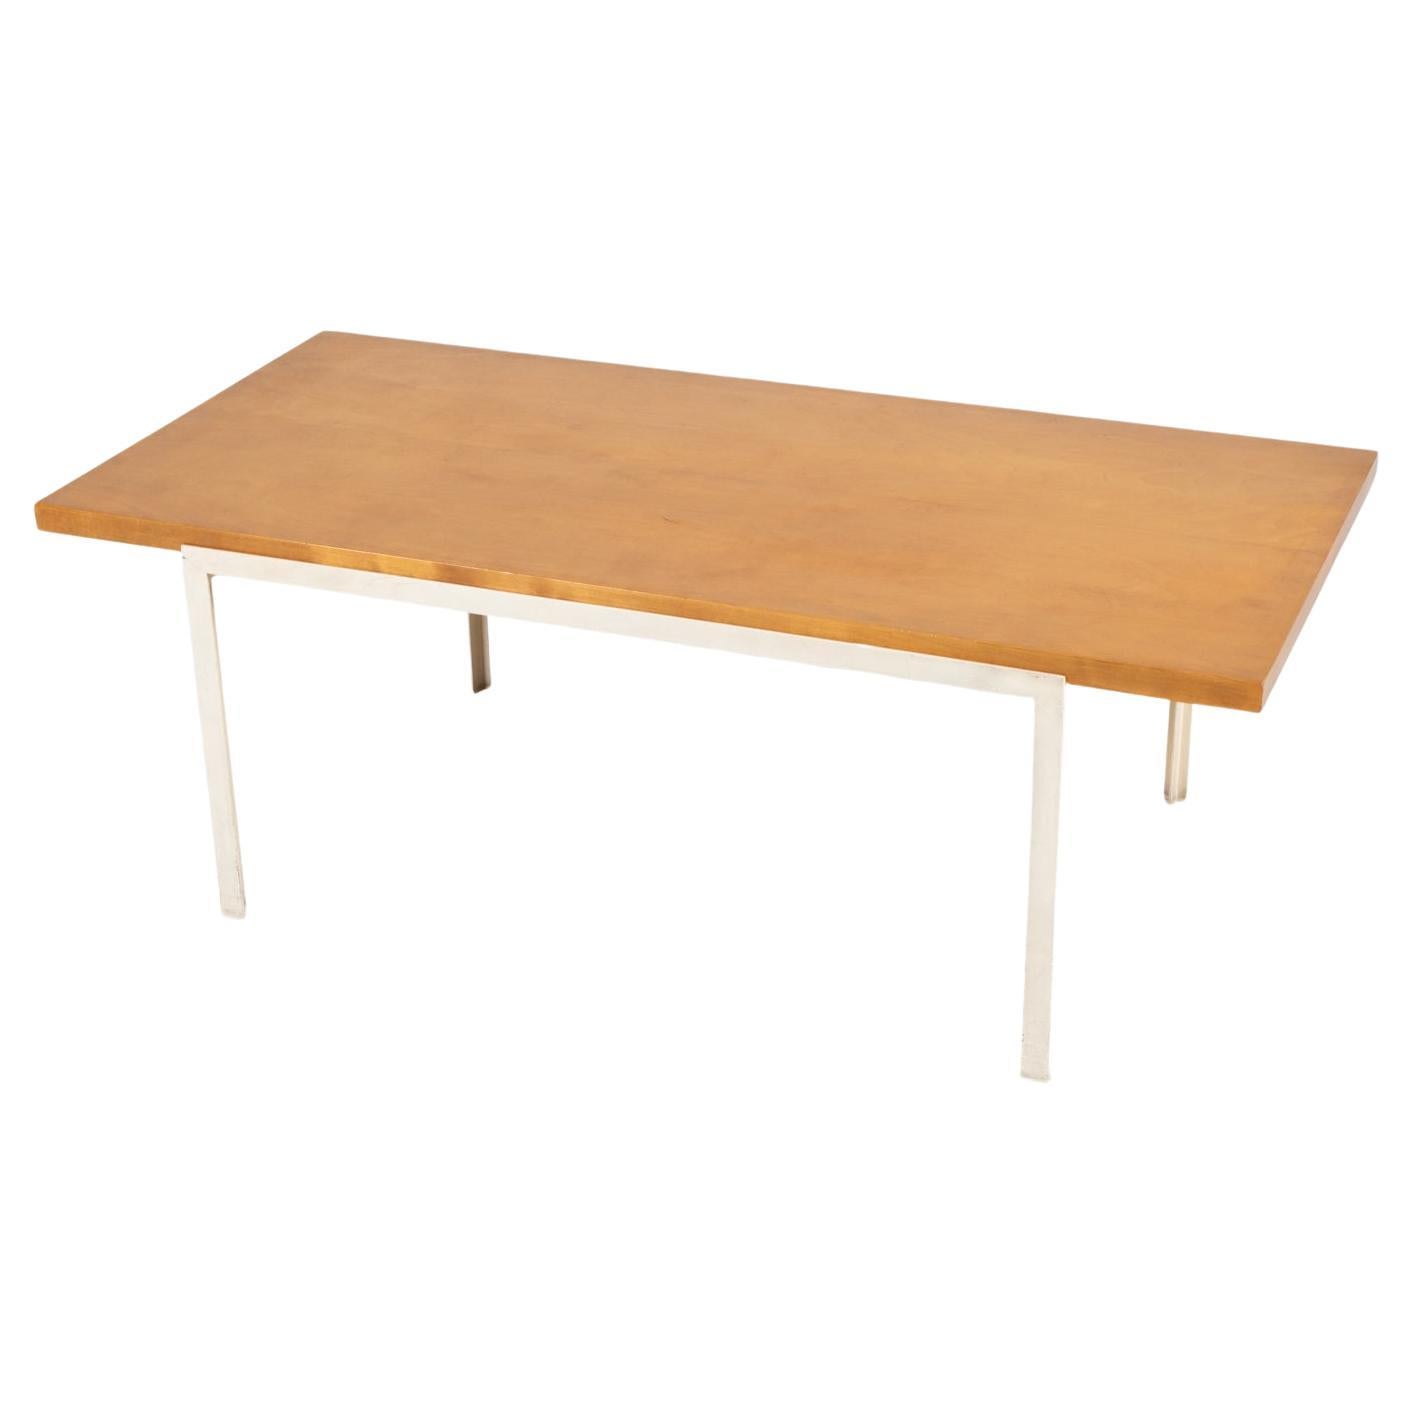 Rare Florence Knoll T-Angle Coffee Table in Birch; Knoll International c. 1960's